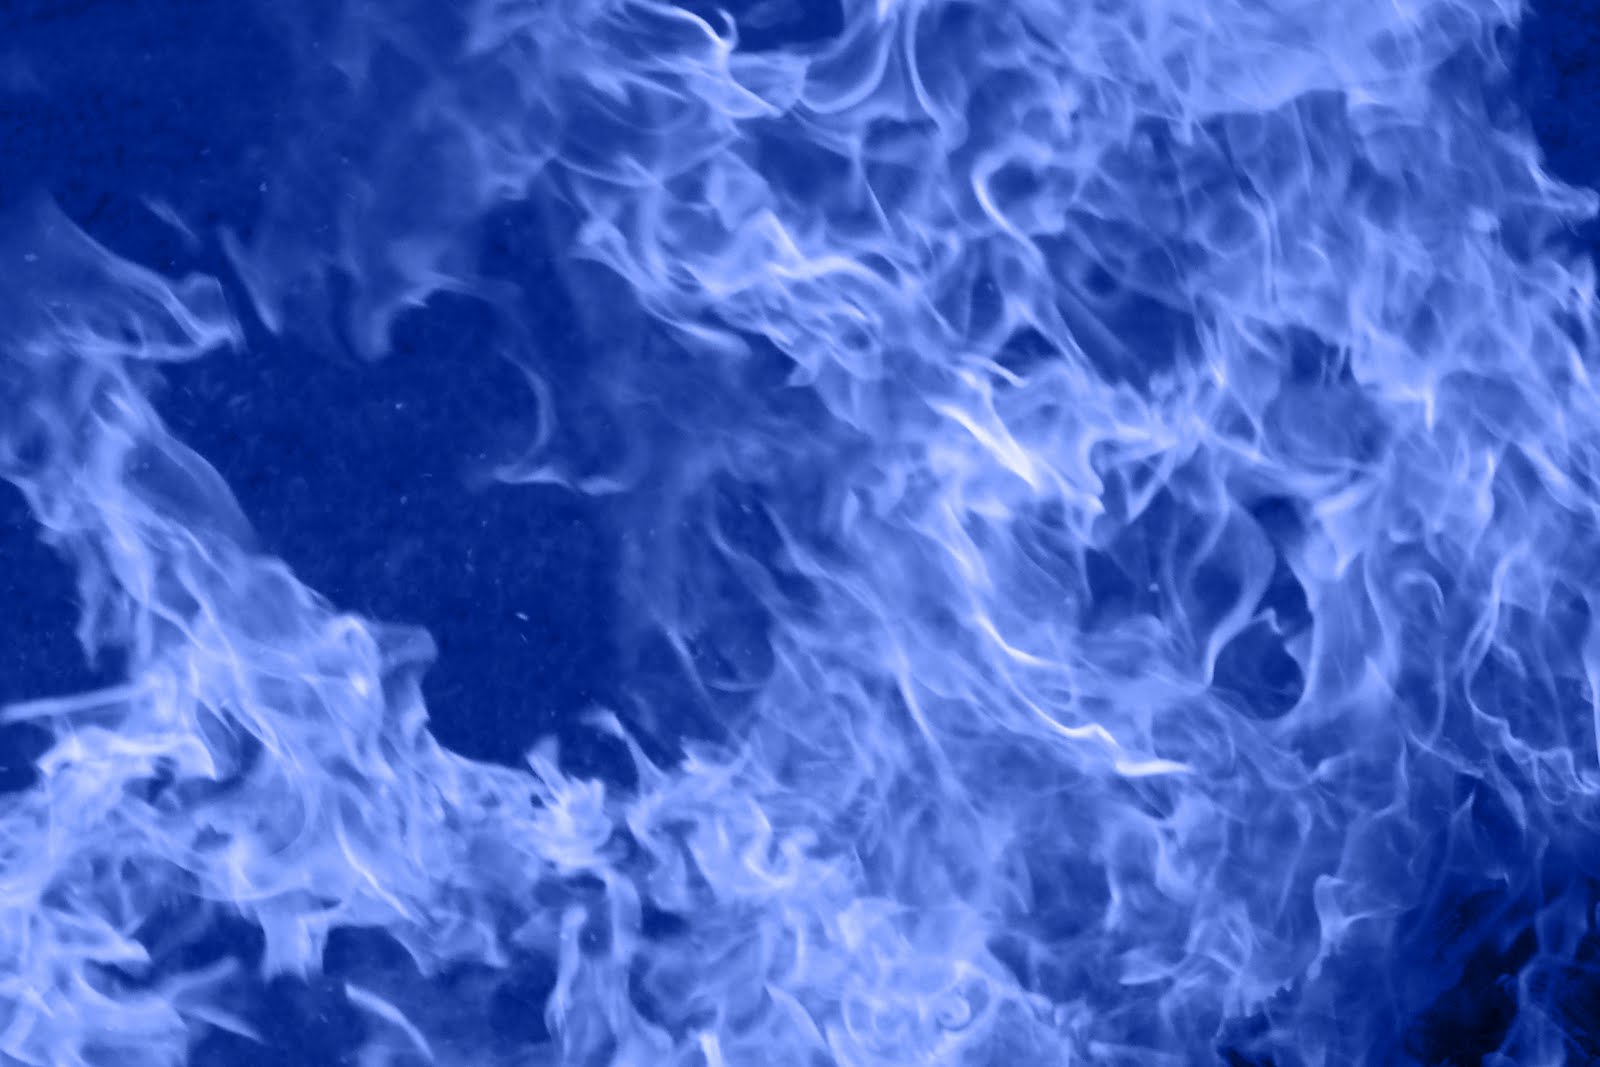 Red And Blue Fire Background Images Pictures   Becuo 1600x1067